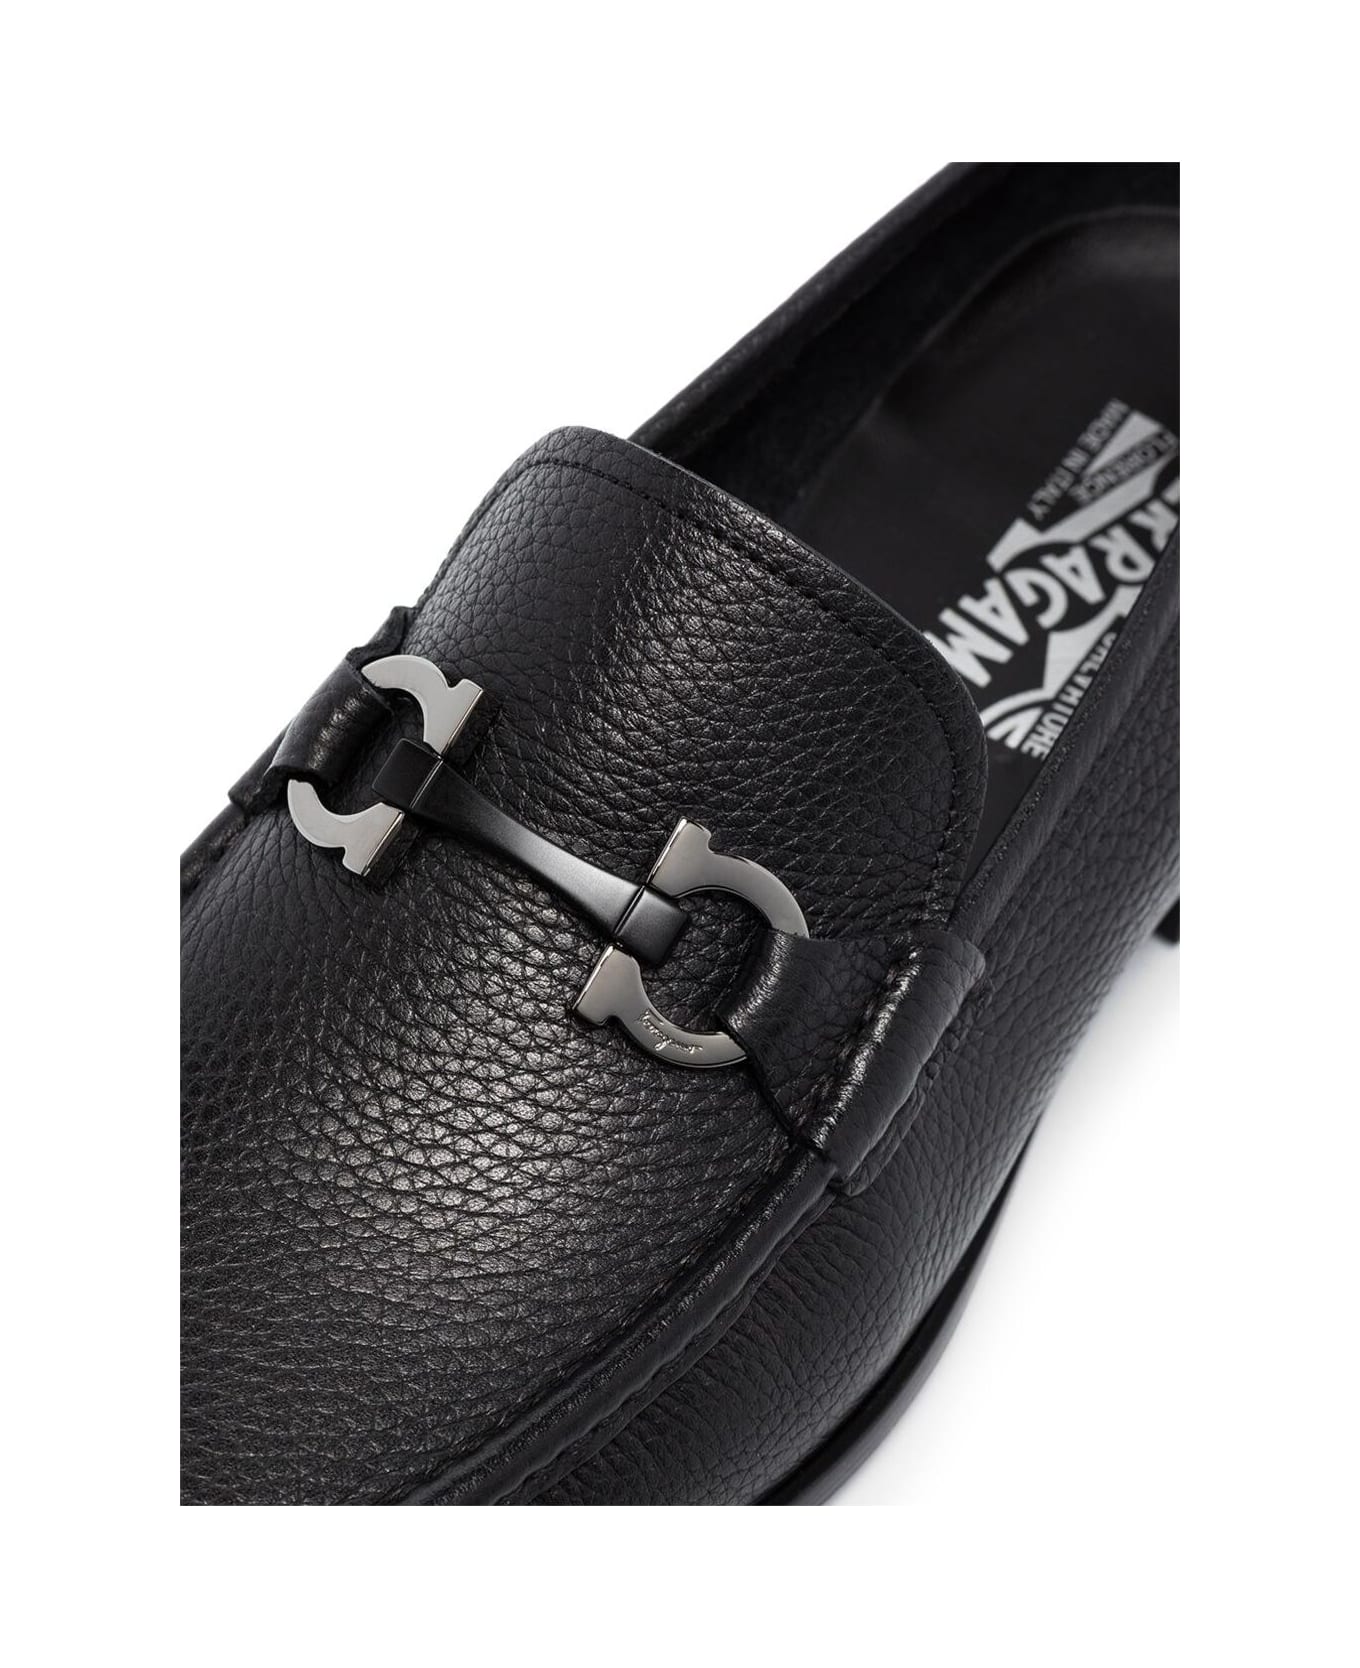 Ferragamo Black Loafers With Tonal Gancini Detail In Hammered Leather Man - Black